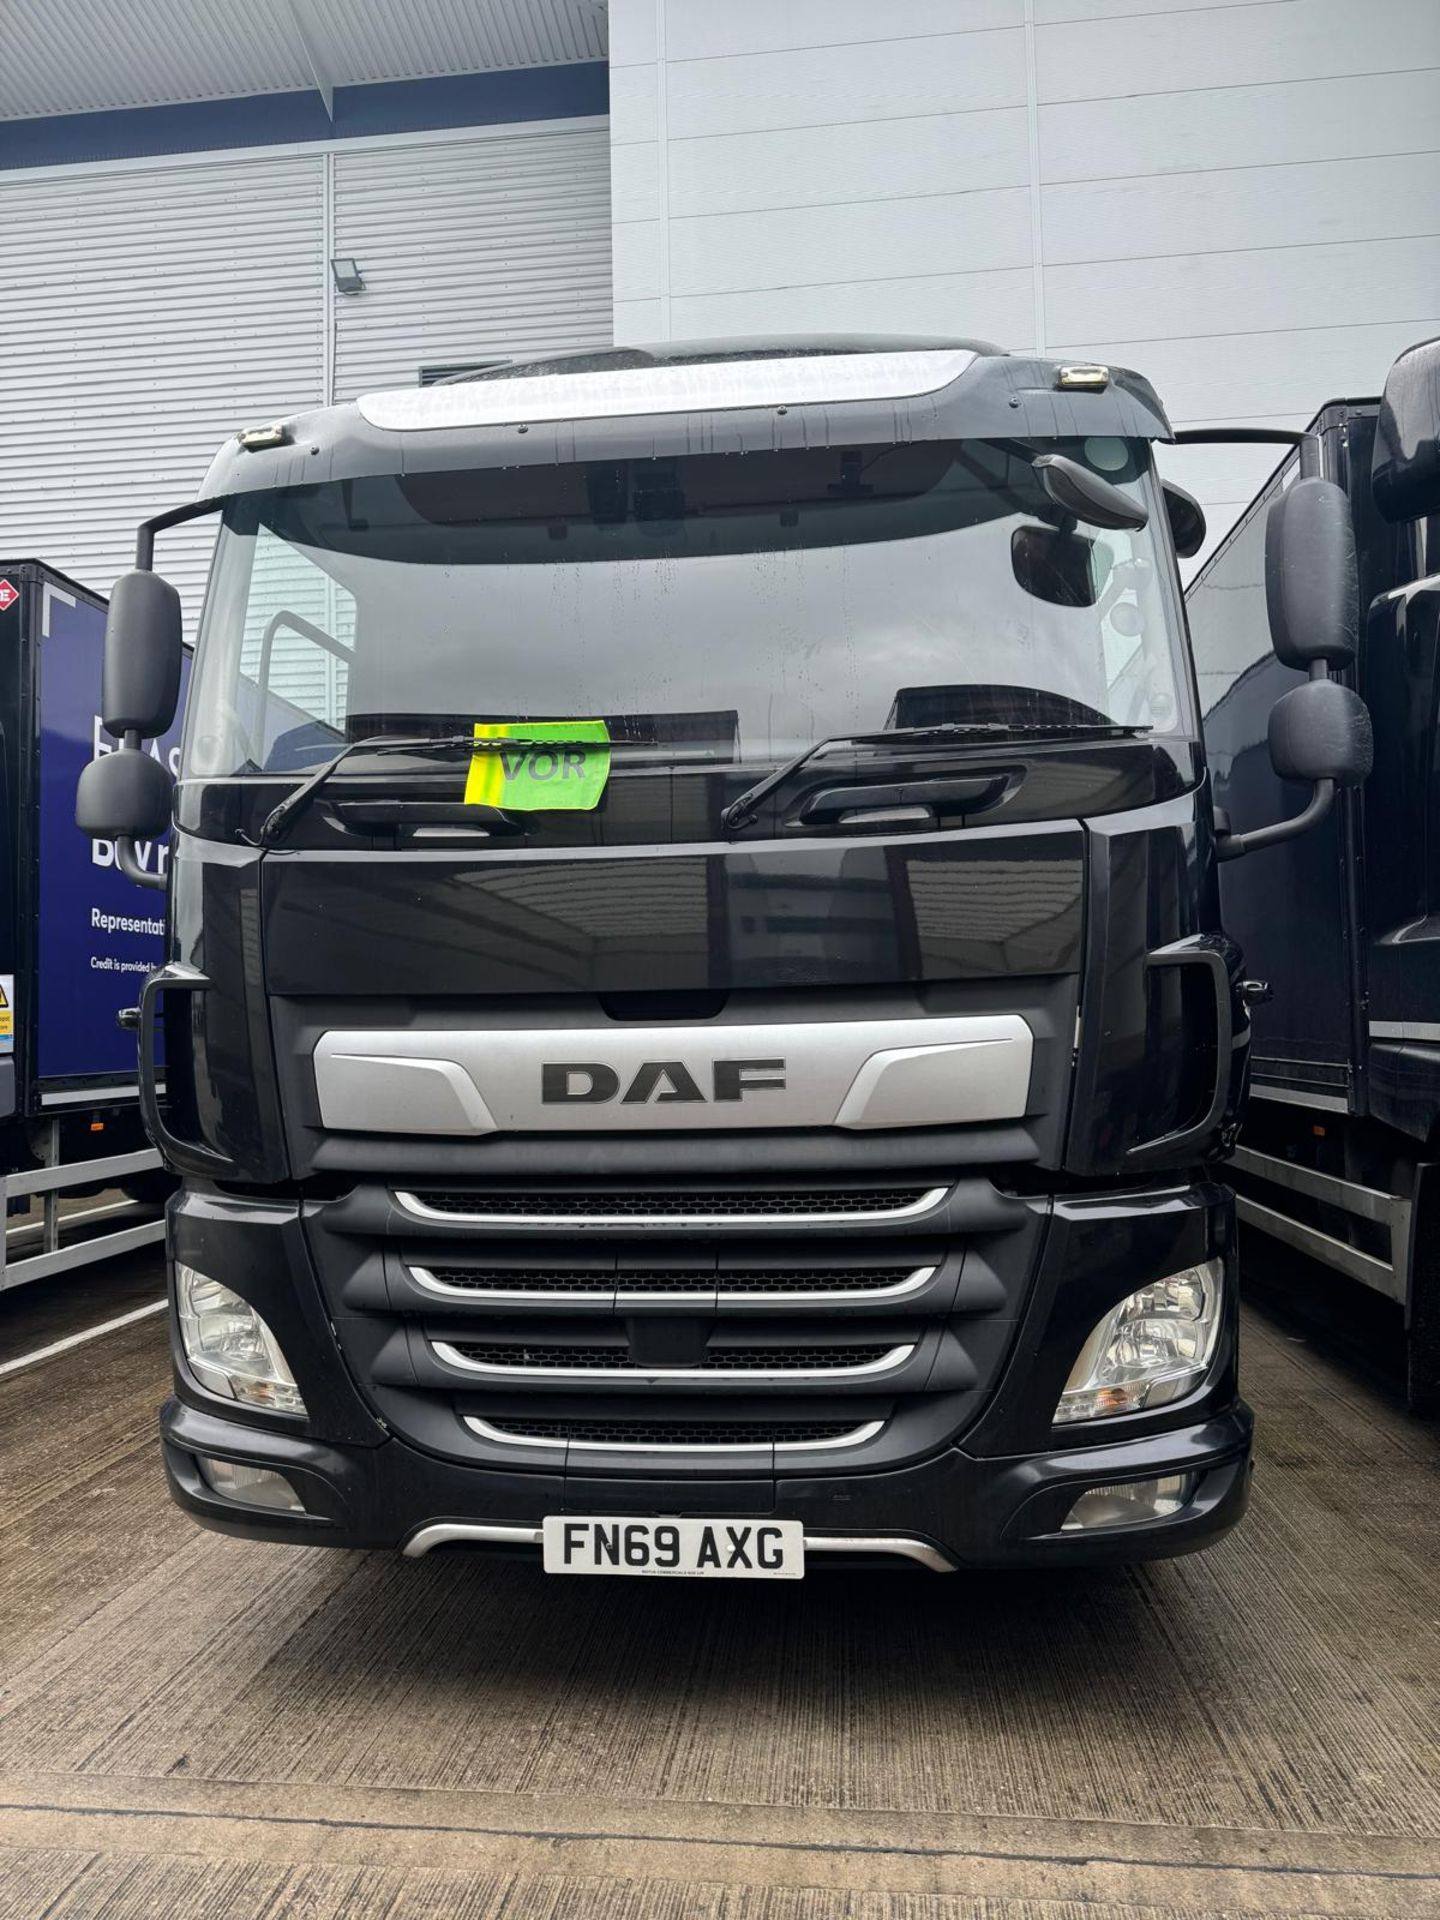 2019, DAF CF 260 FA (Ex-Fleet Owned & Maintained) - FN69 AXG (18 Ton Rigid Truck with Tail Lift) - Bild 2 aus 7